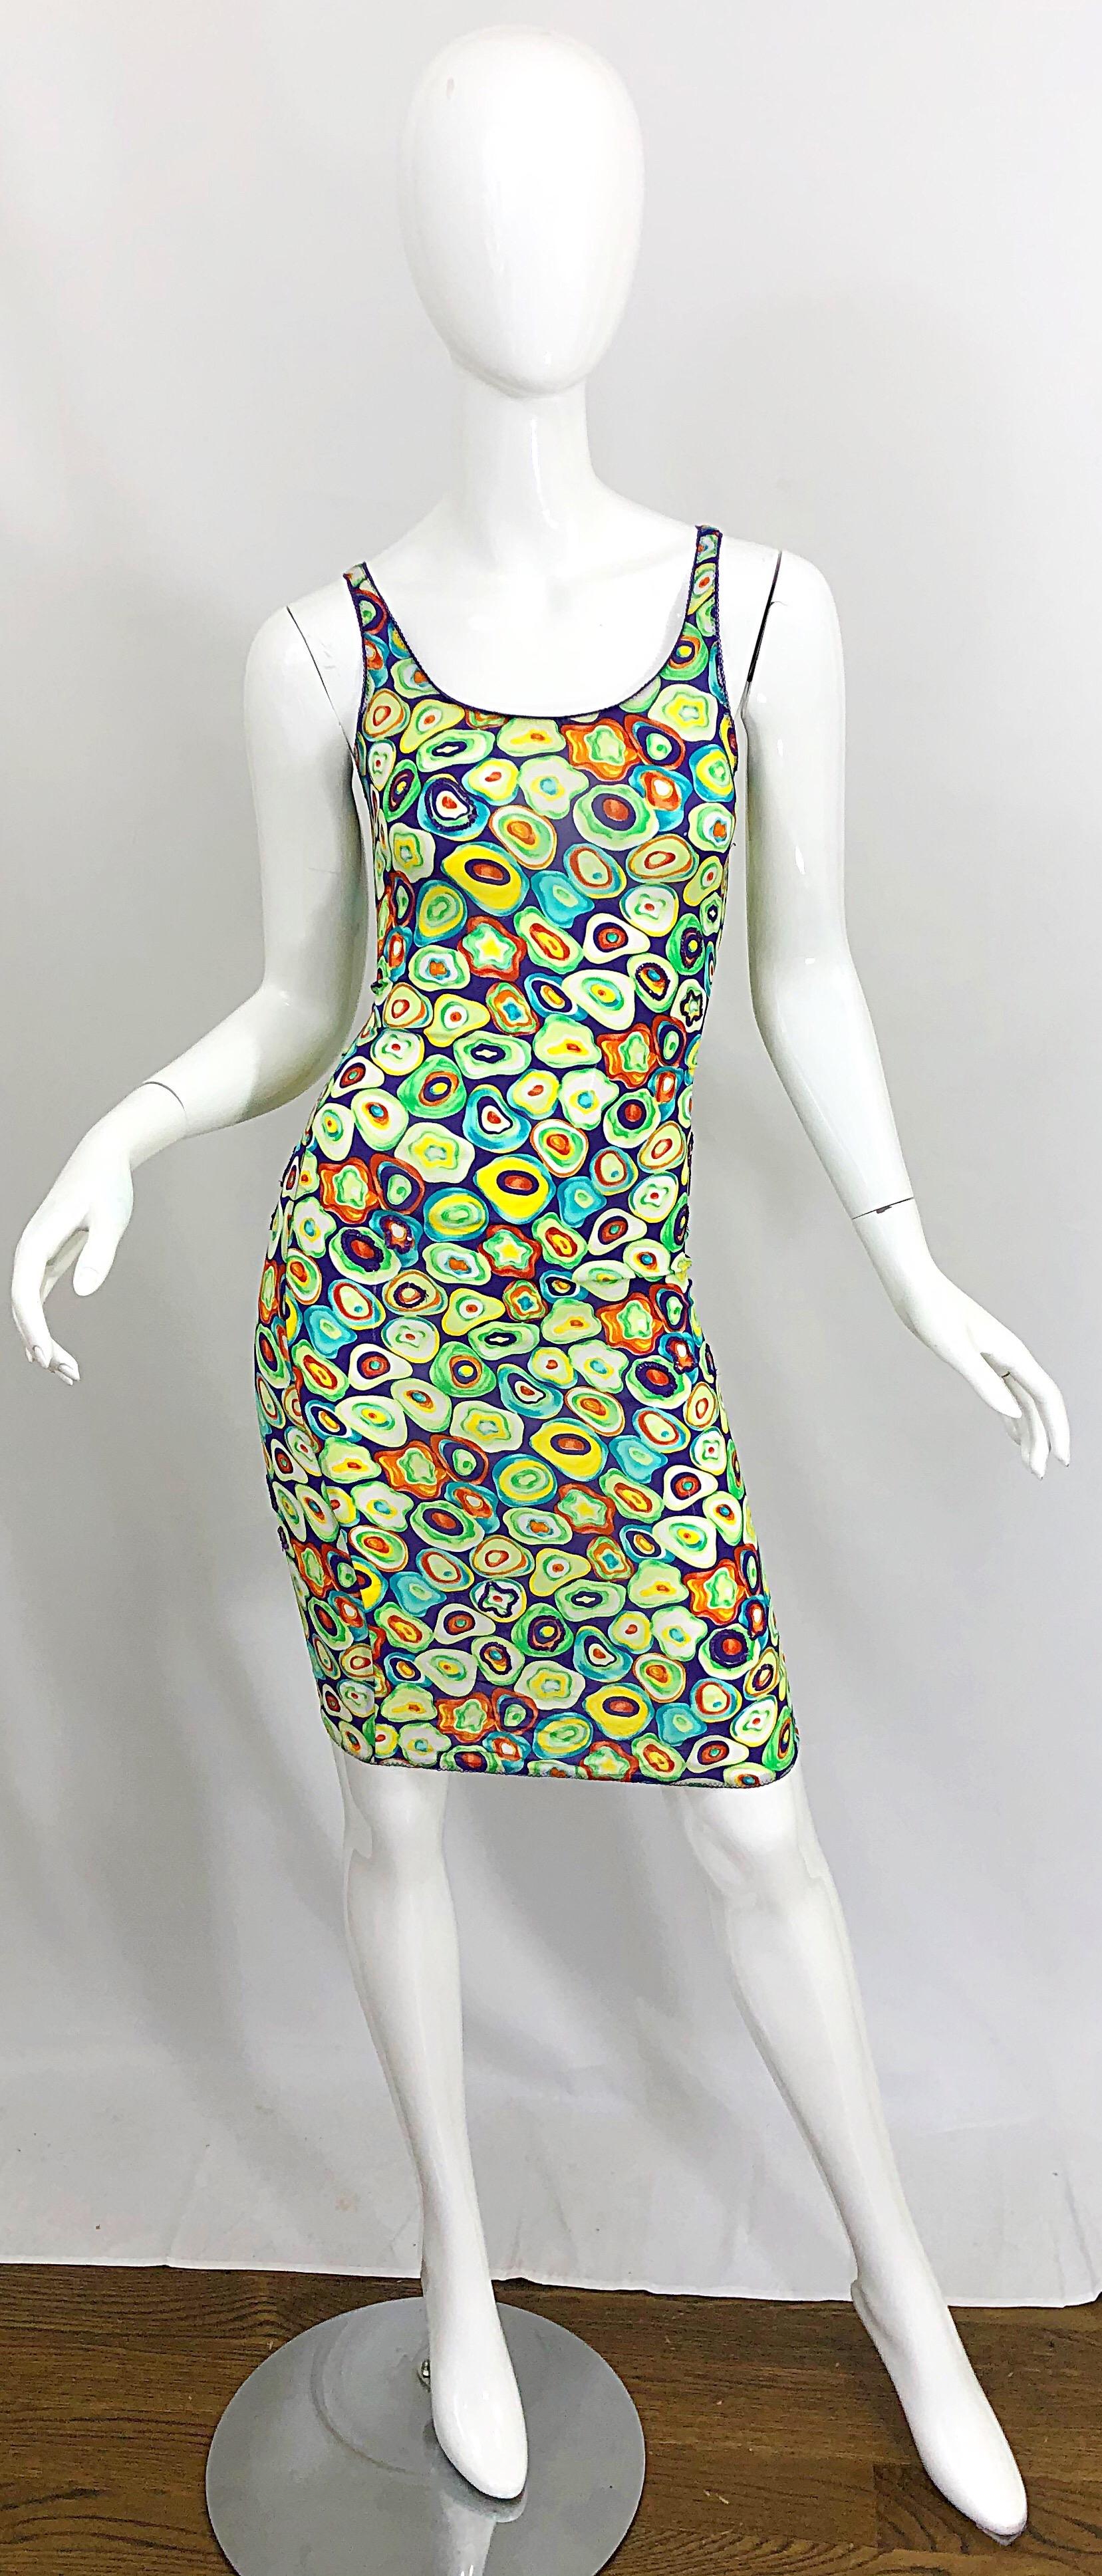 Fun vintage 90s GIANNI VERSACE colorful sushi novelty print bodcon sequin dress! Features vibrant colors of purple, yellow, green, turquoise, orange and white throughout. Purple sequins sporadically sewn around sushi throughout the dress. Simply